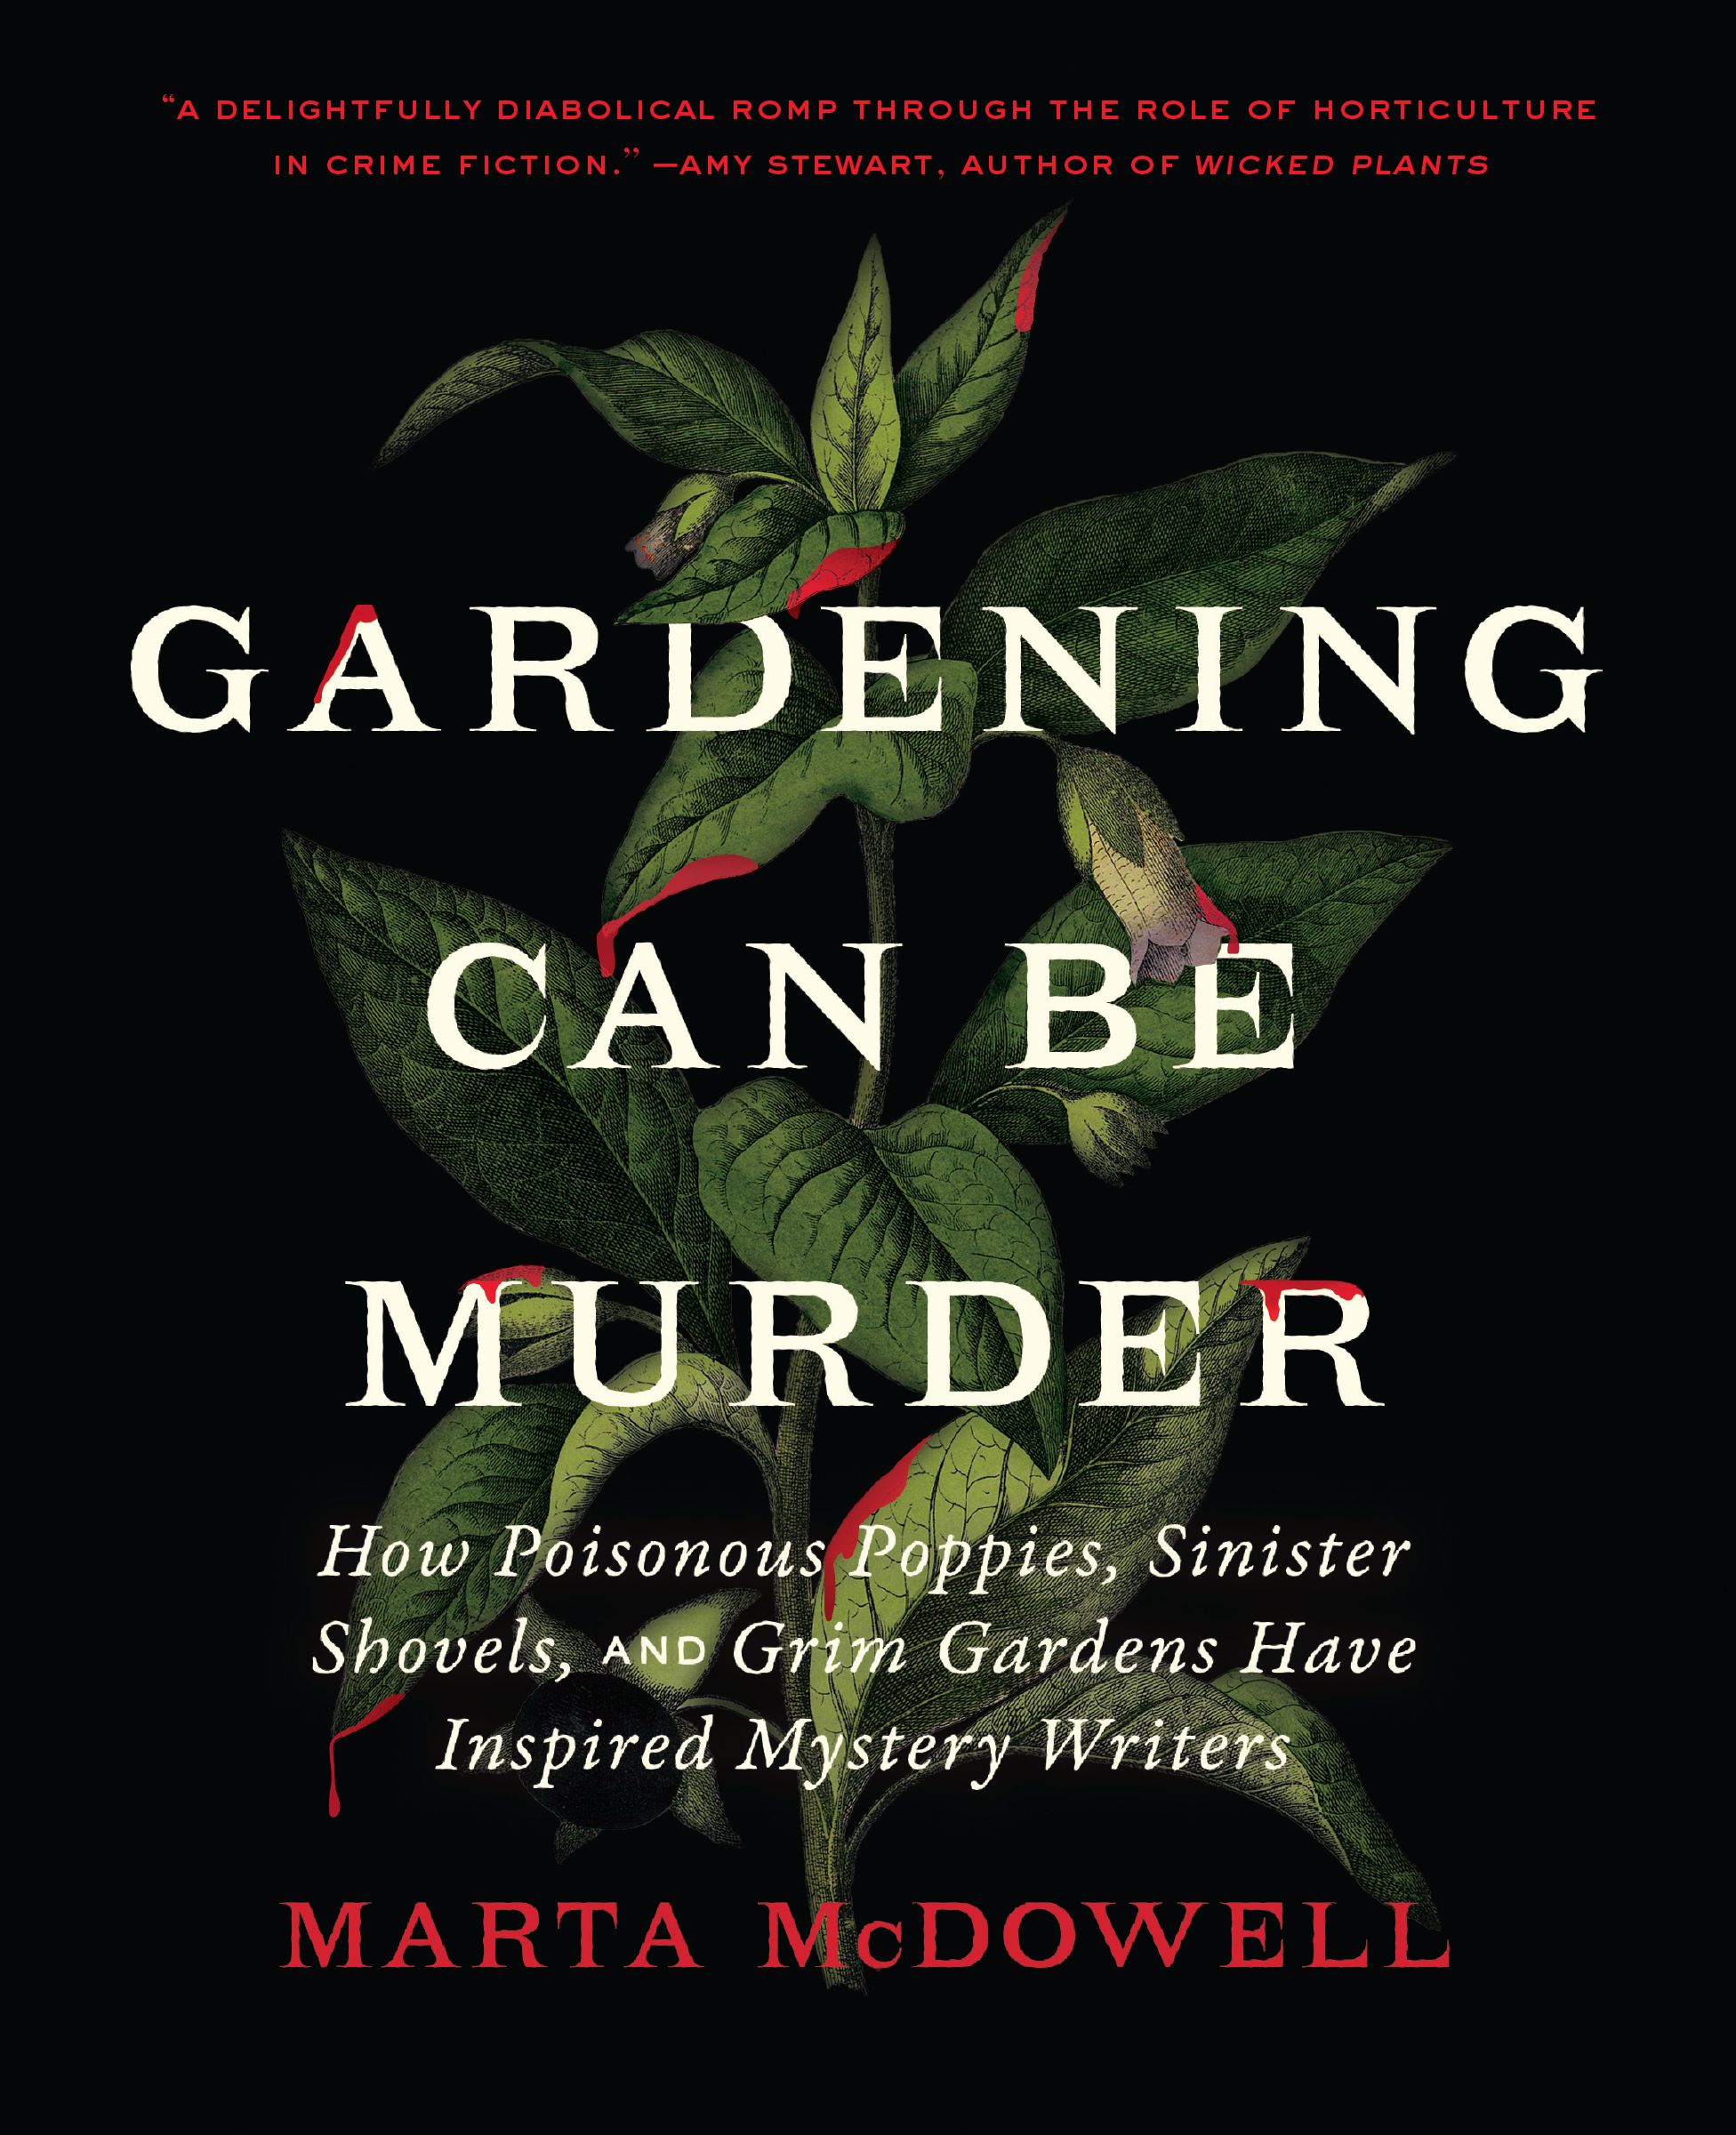 image of the book, "Gardening Can Be Murder"